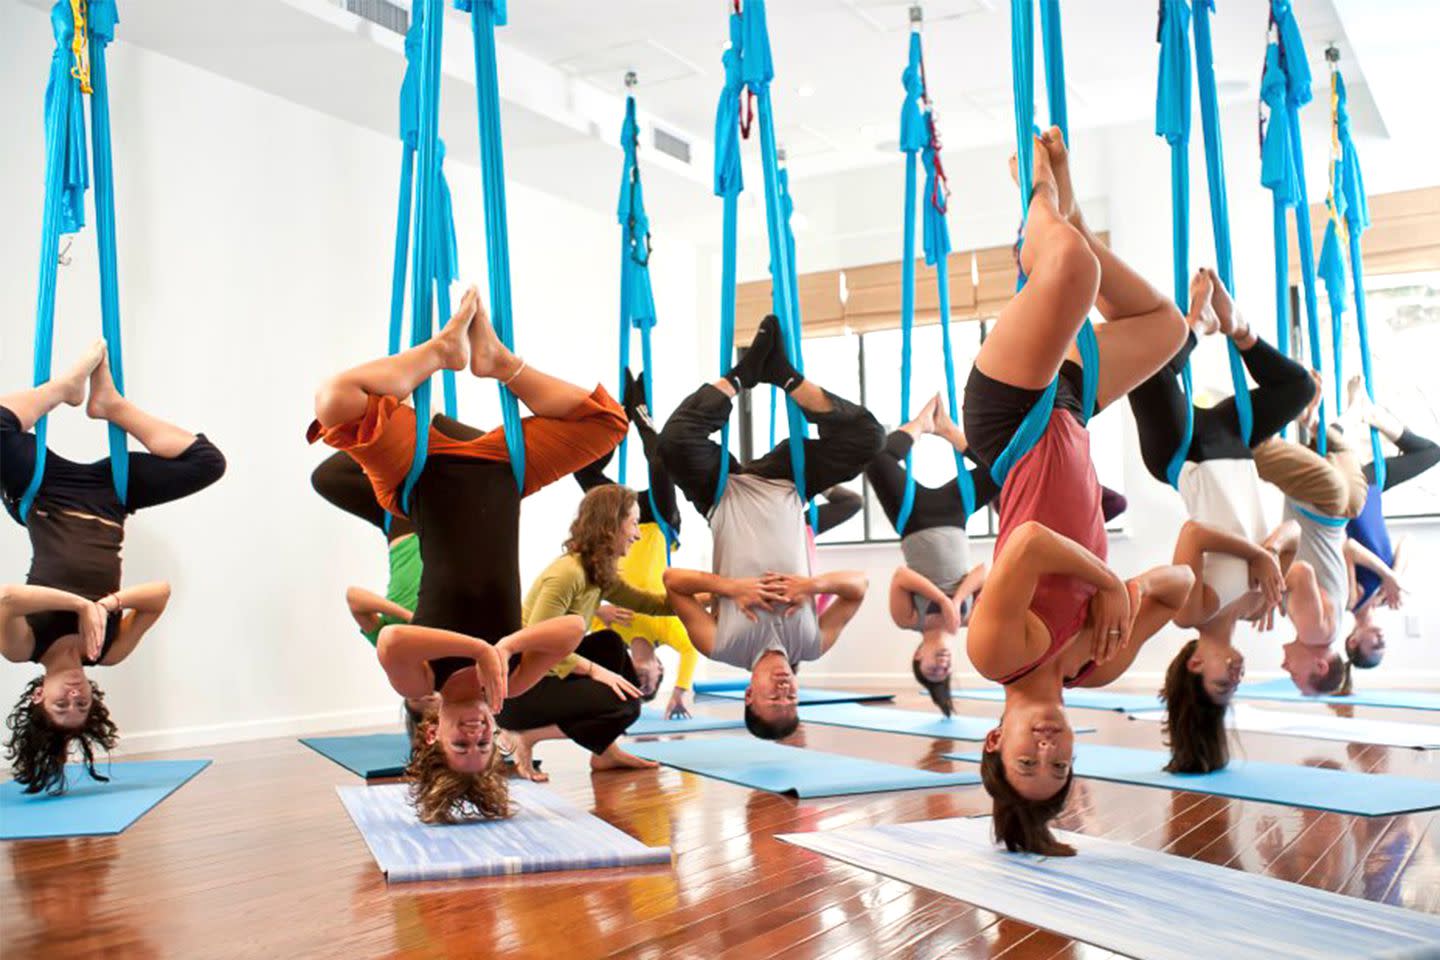 Aerial Yoga Studios In Nyc For Off The Mat Fun